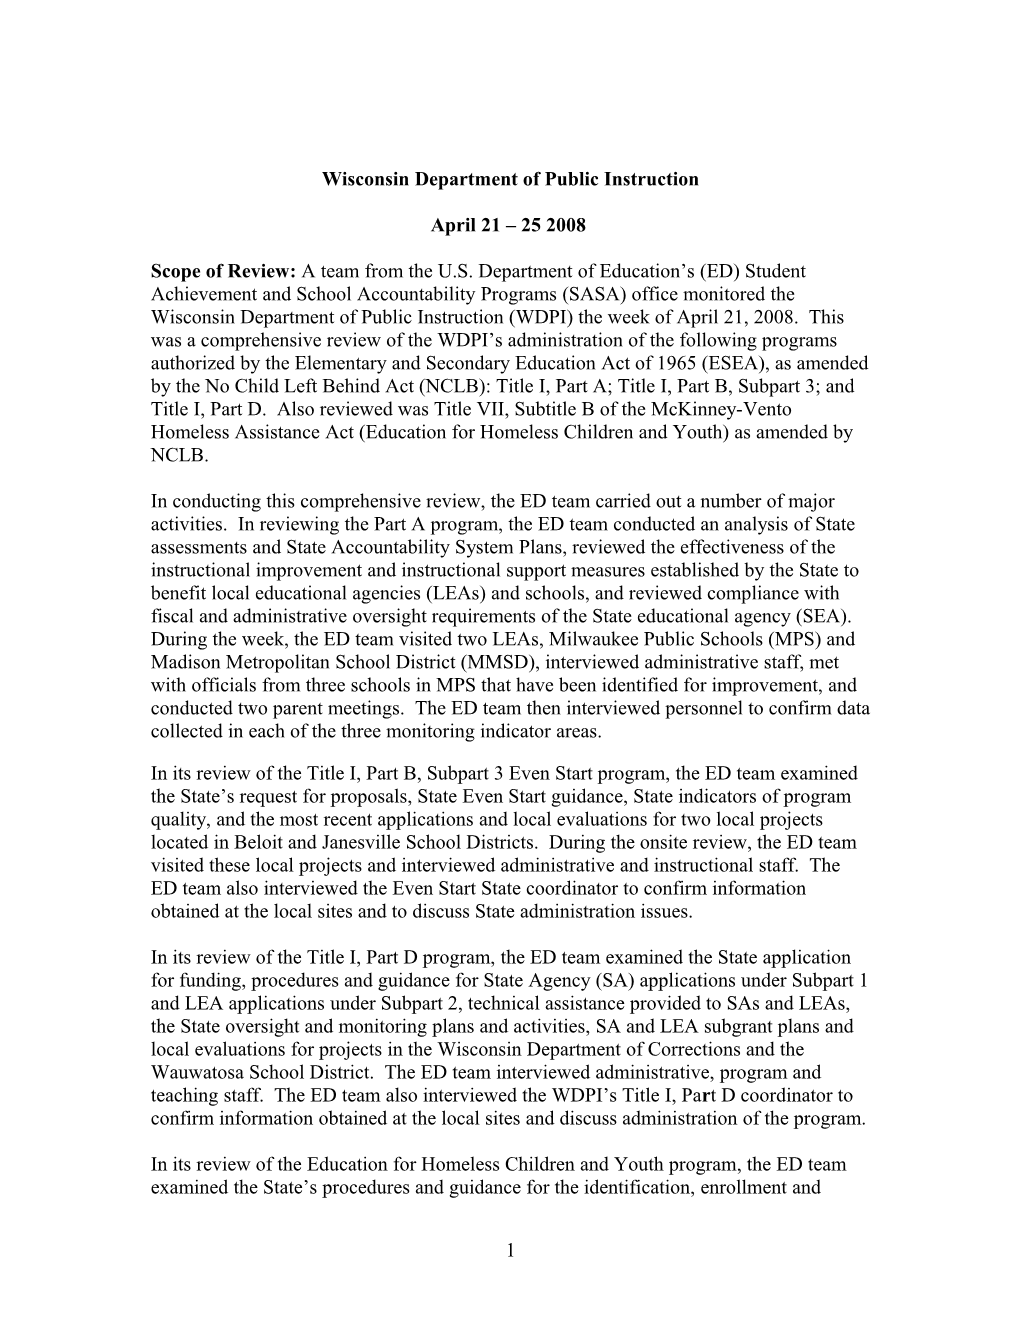 SASA Title I Monitoring Report for Wisconsin, April 21-25, 2008 (MS Word)